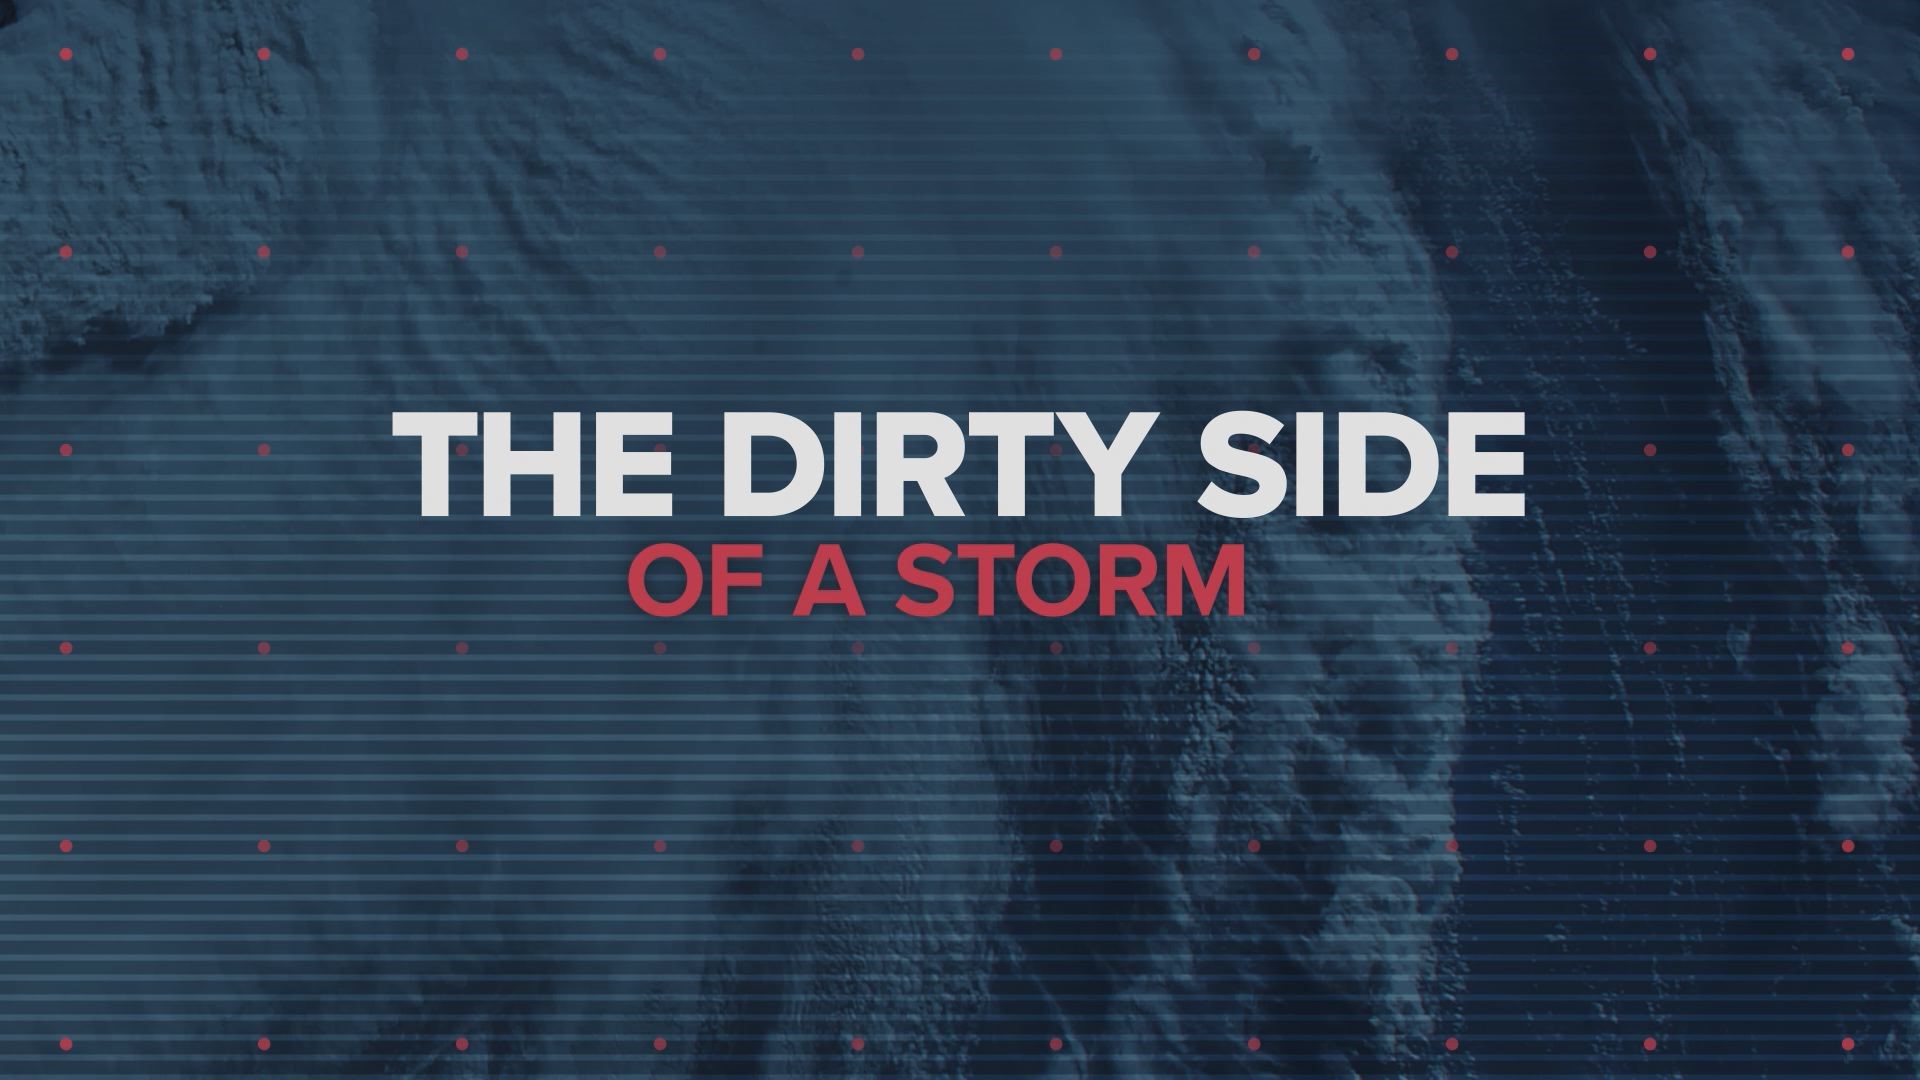 You may hear us say something about the “dirty side” of a storm. What is that –and why is it different?